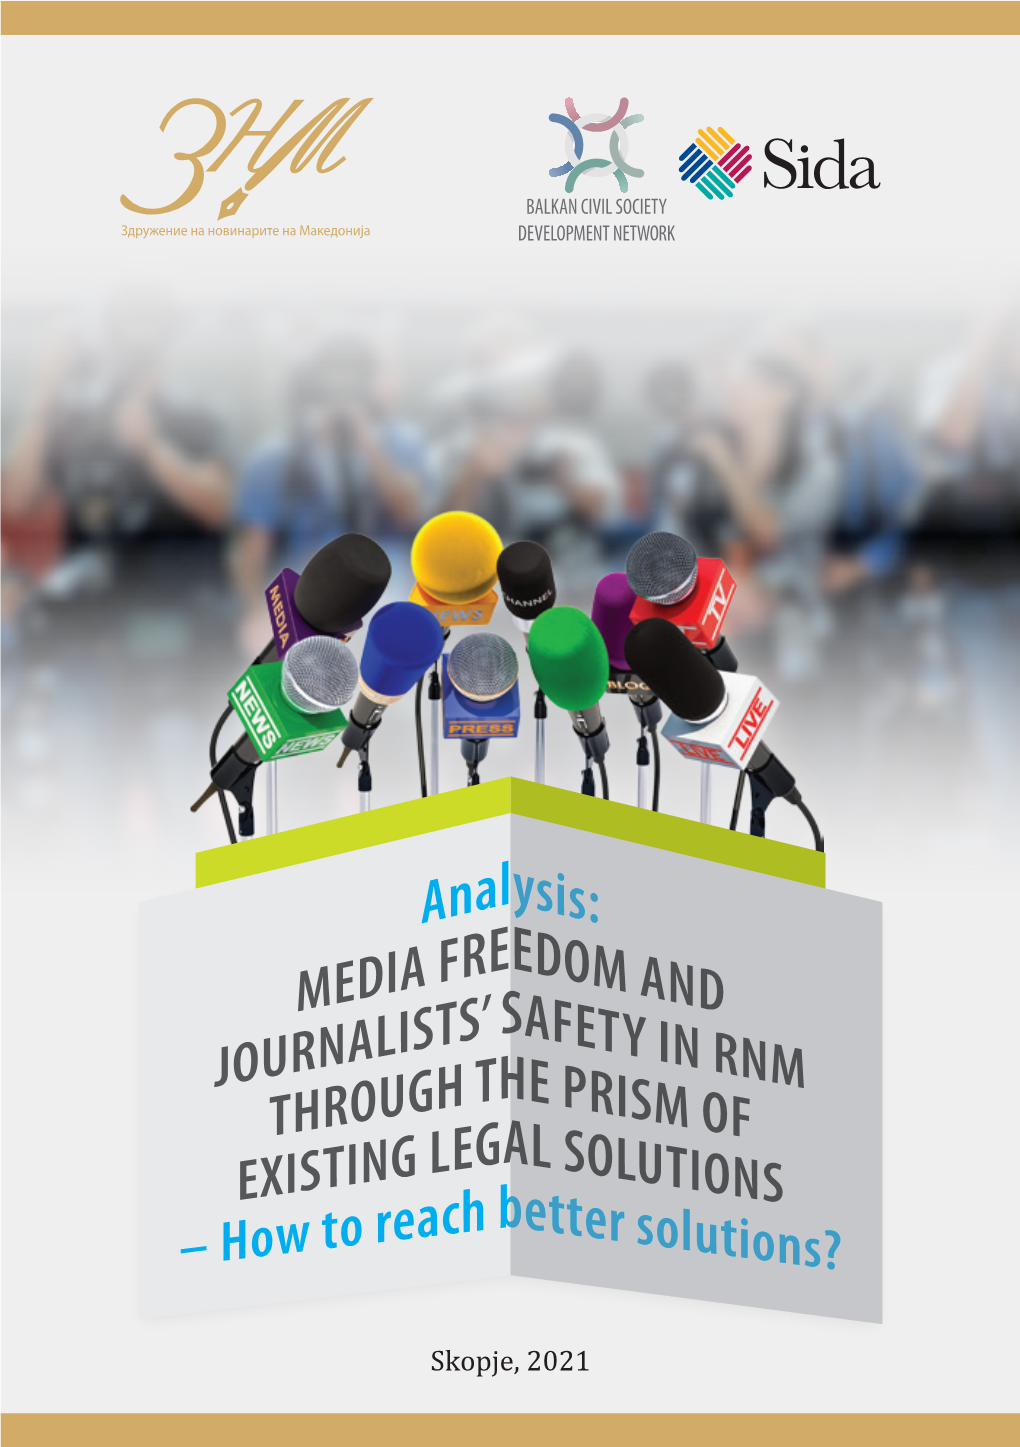 Skopje, 2021 ANALYSIS: Media Freedom and Journalists’ Safety in RNM Through the Prism of Existing Legal Solutions – HOW to REACH BETTER SOLUTIONS? IMPRESUM